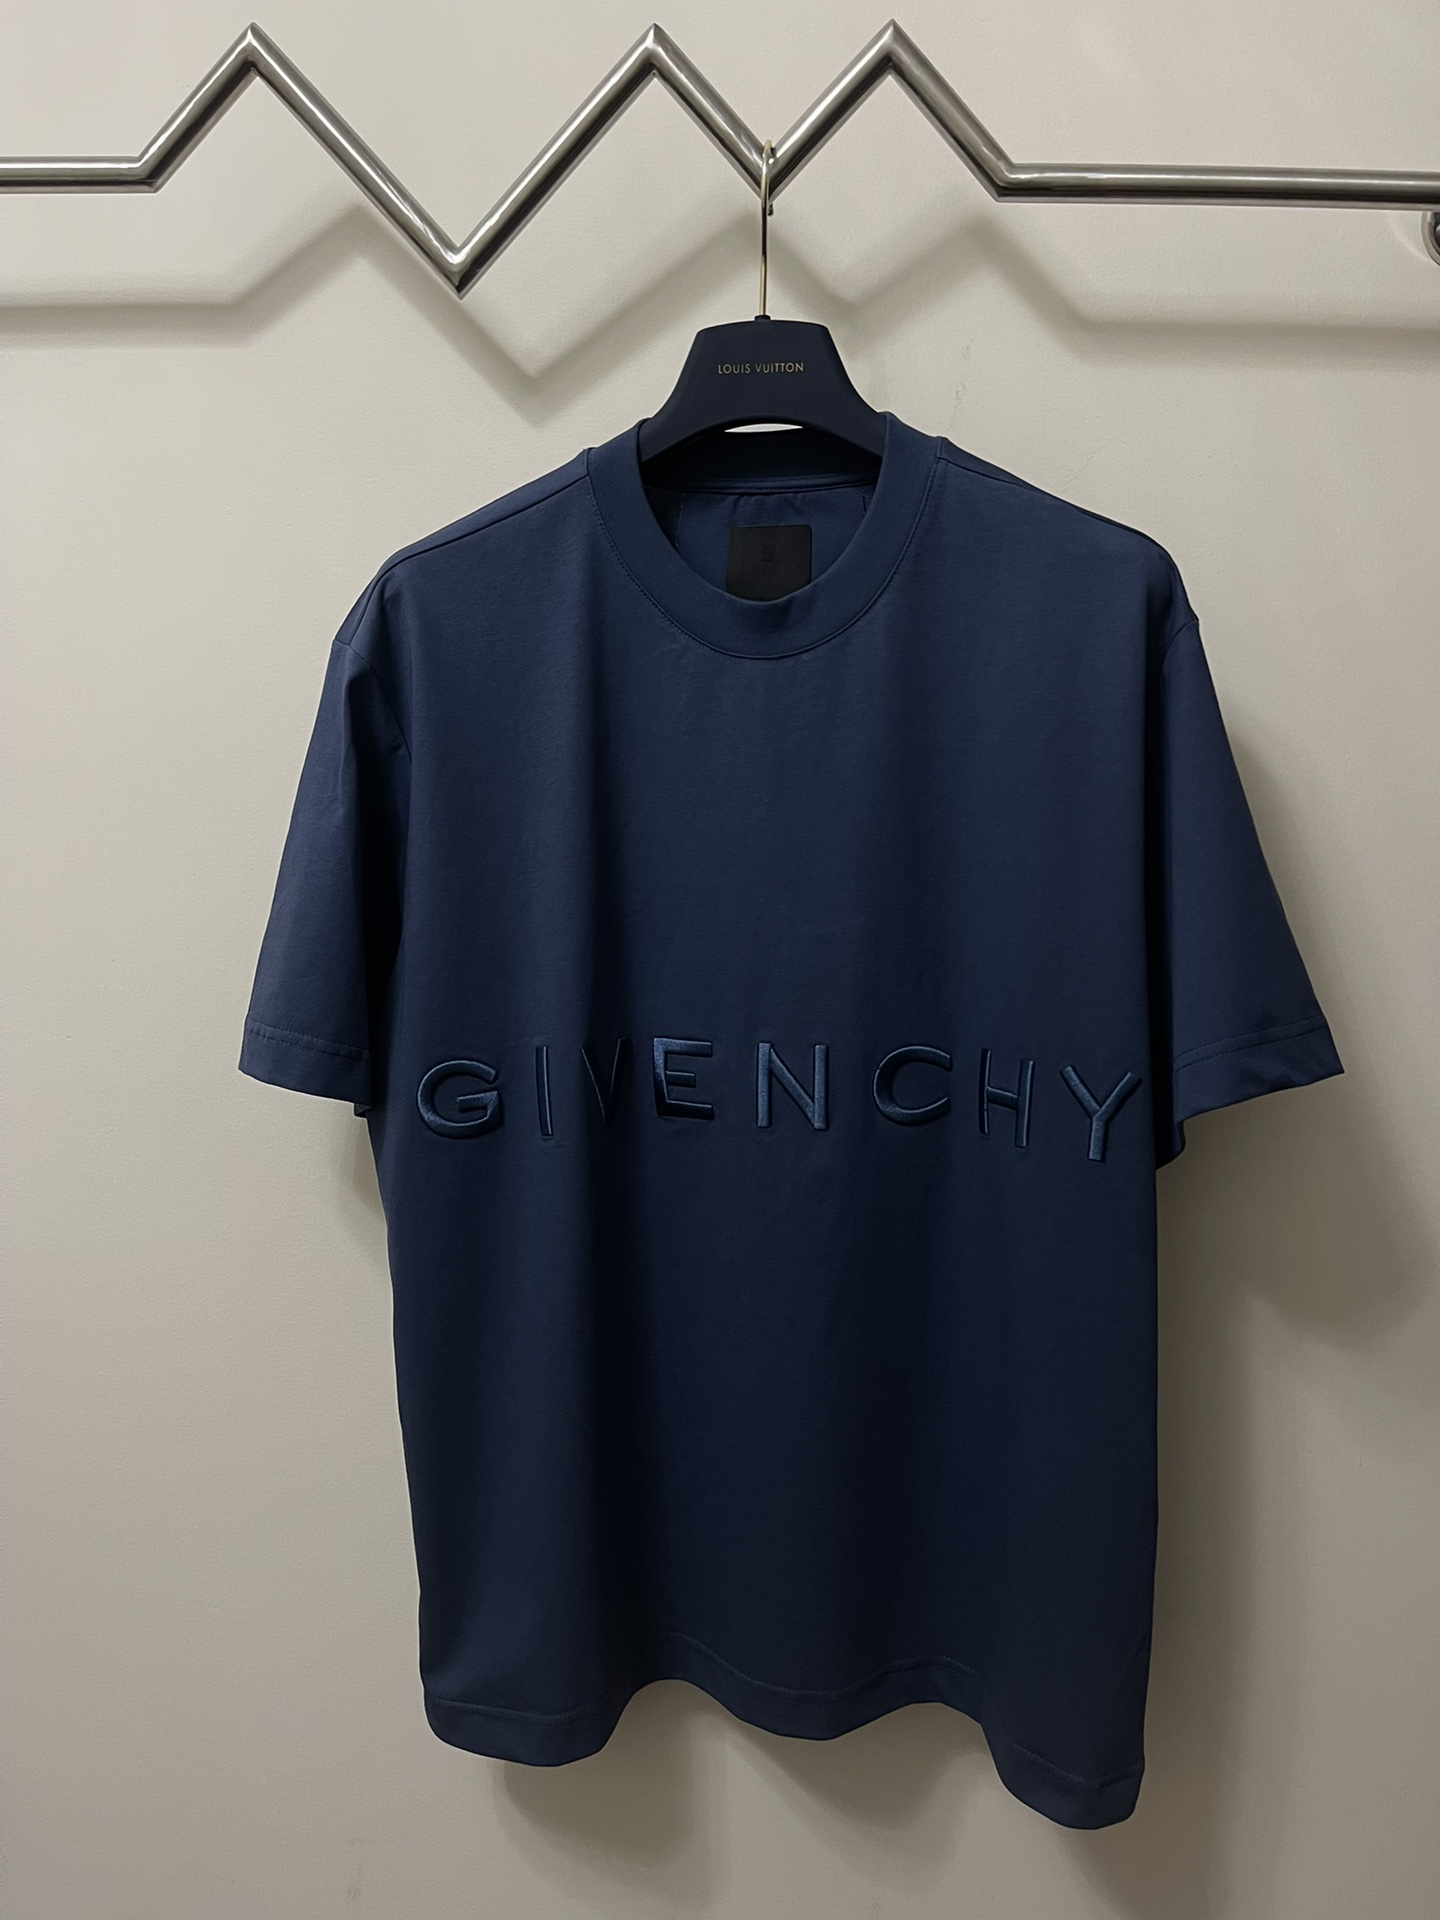 Givenchy Clothing T-Shirt Blue Embroidery Unisex Cotton Mercerized Spring/Summer Collection Short Sleeve